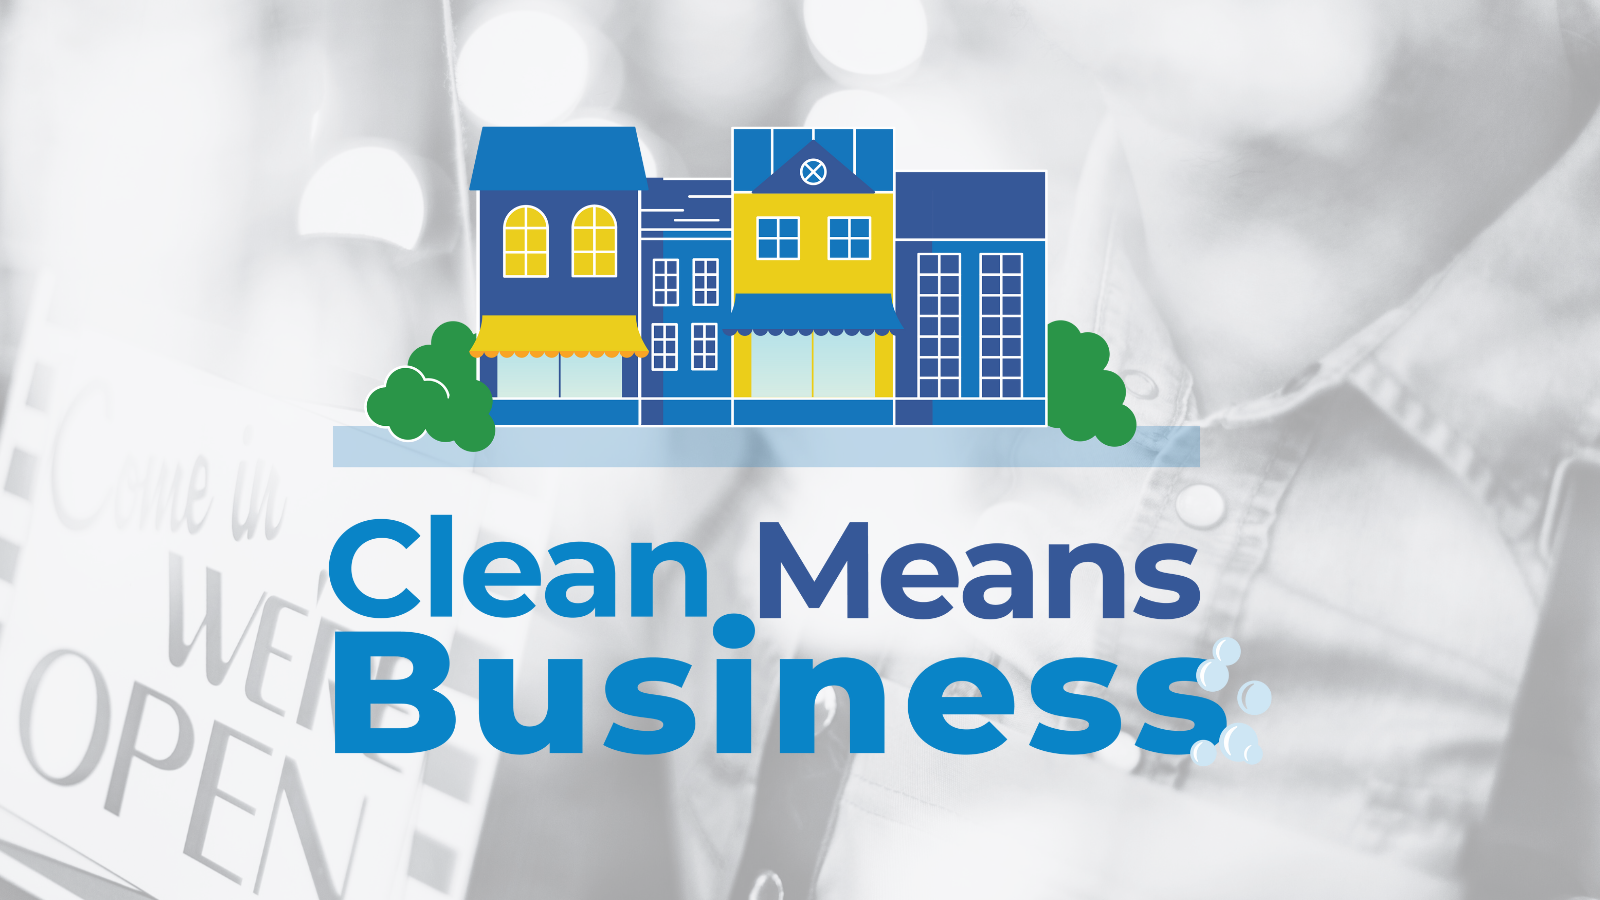 https://www.cleaninginstitute.org/sites/default/files/pictures/whats-new/CleanMeansBusiness1-TW.png